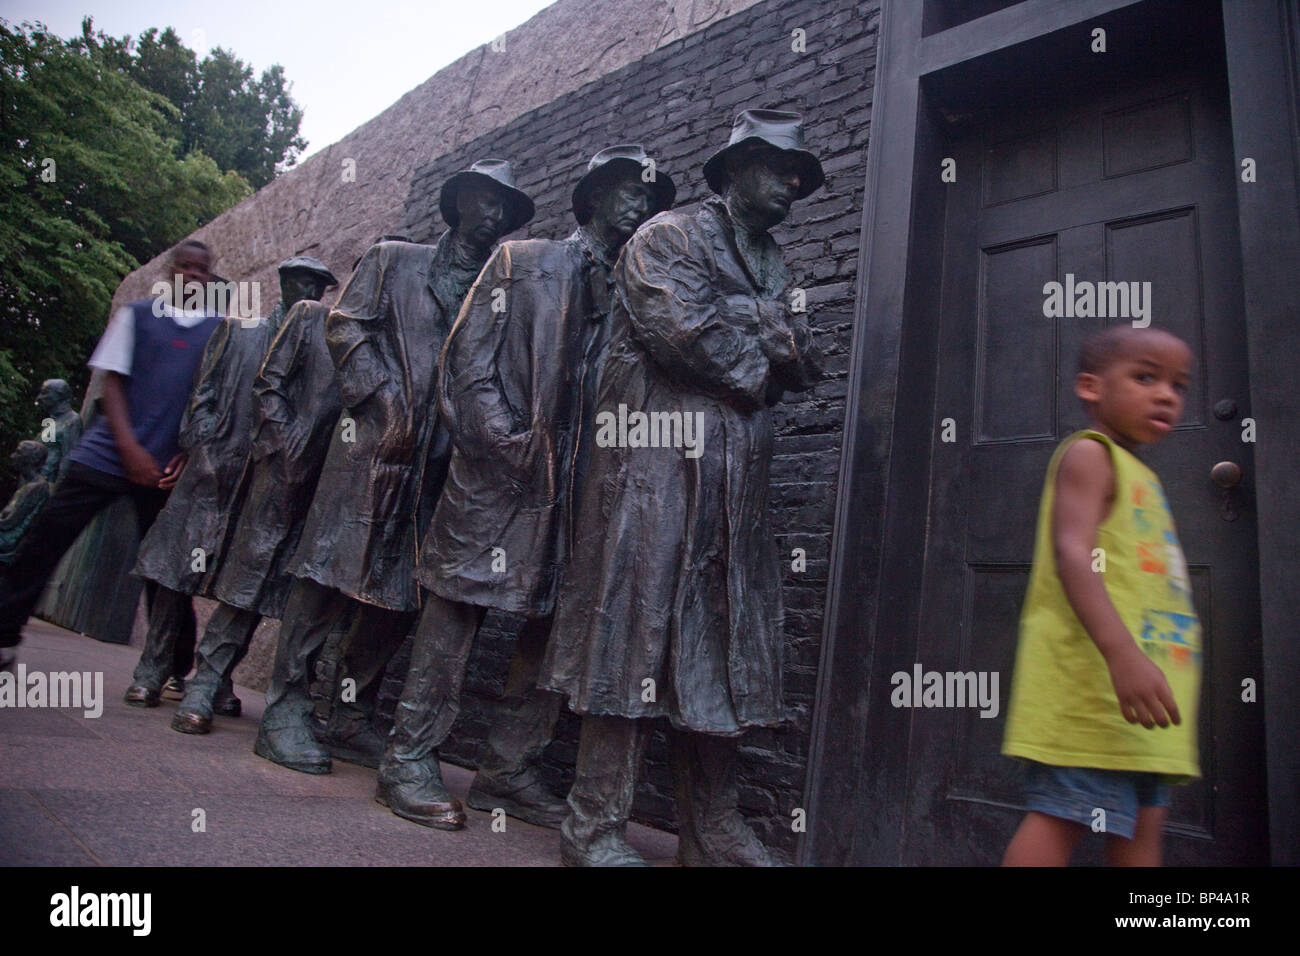 The Franklin Delano Roosevelt (FDR) Memorial in Washington, DC houses a 'room' depicting an urban breadline. Stock Photo